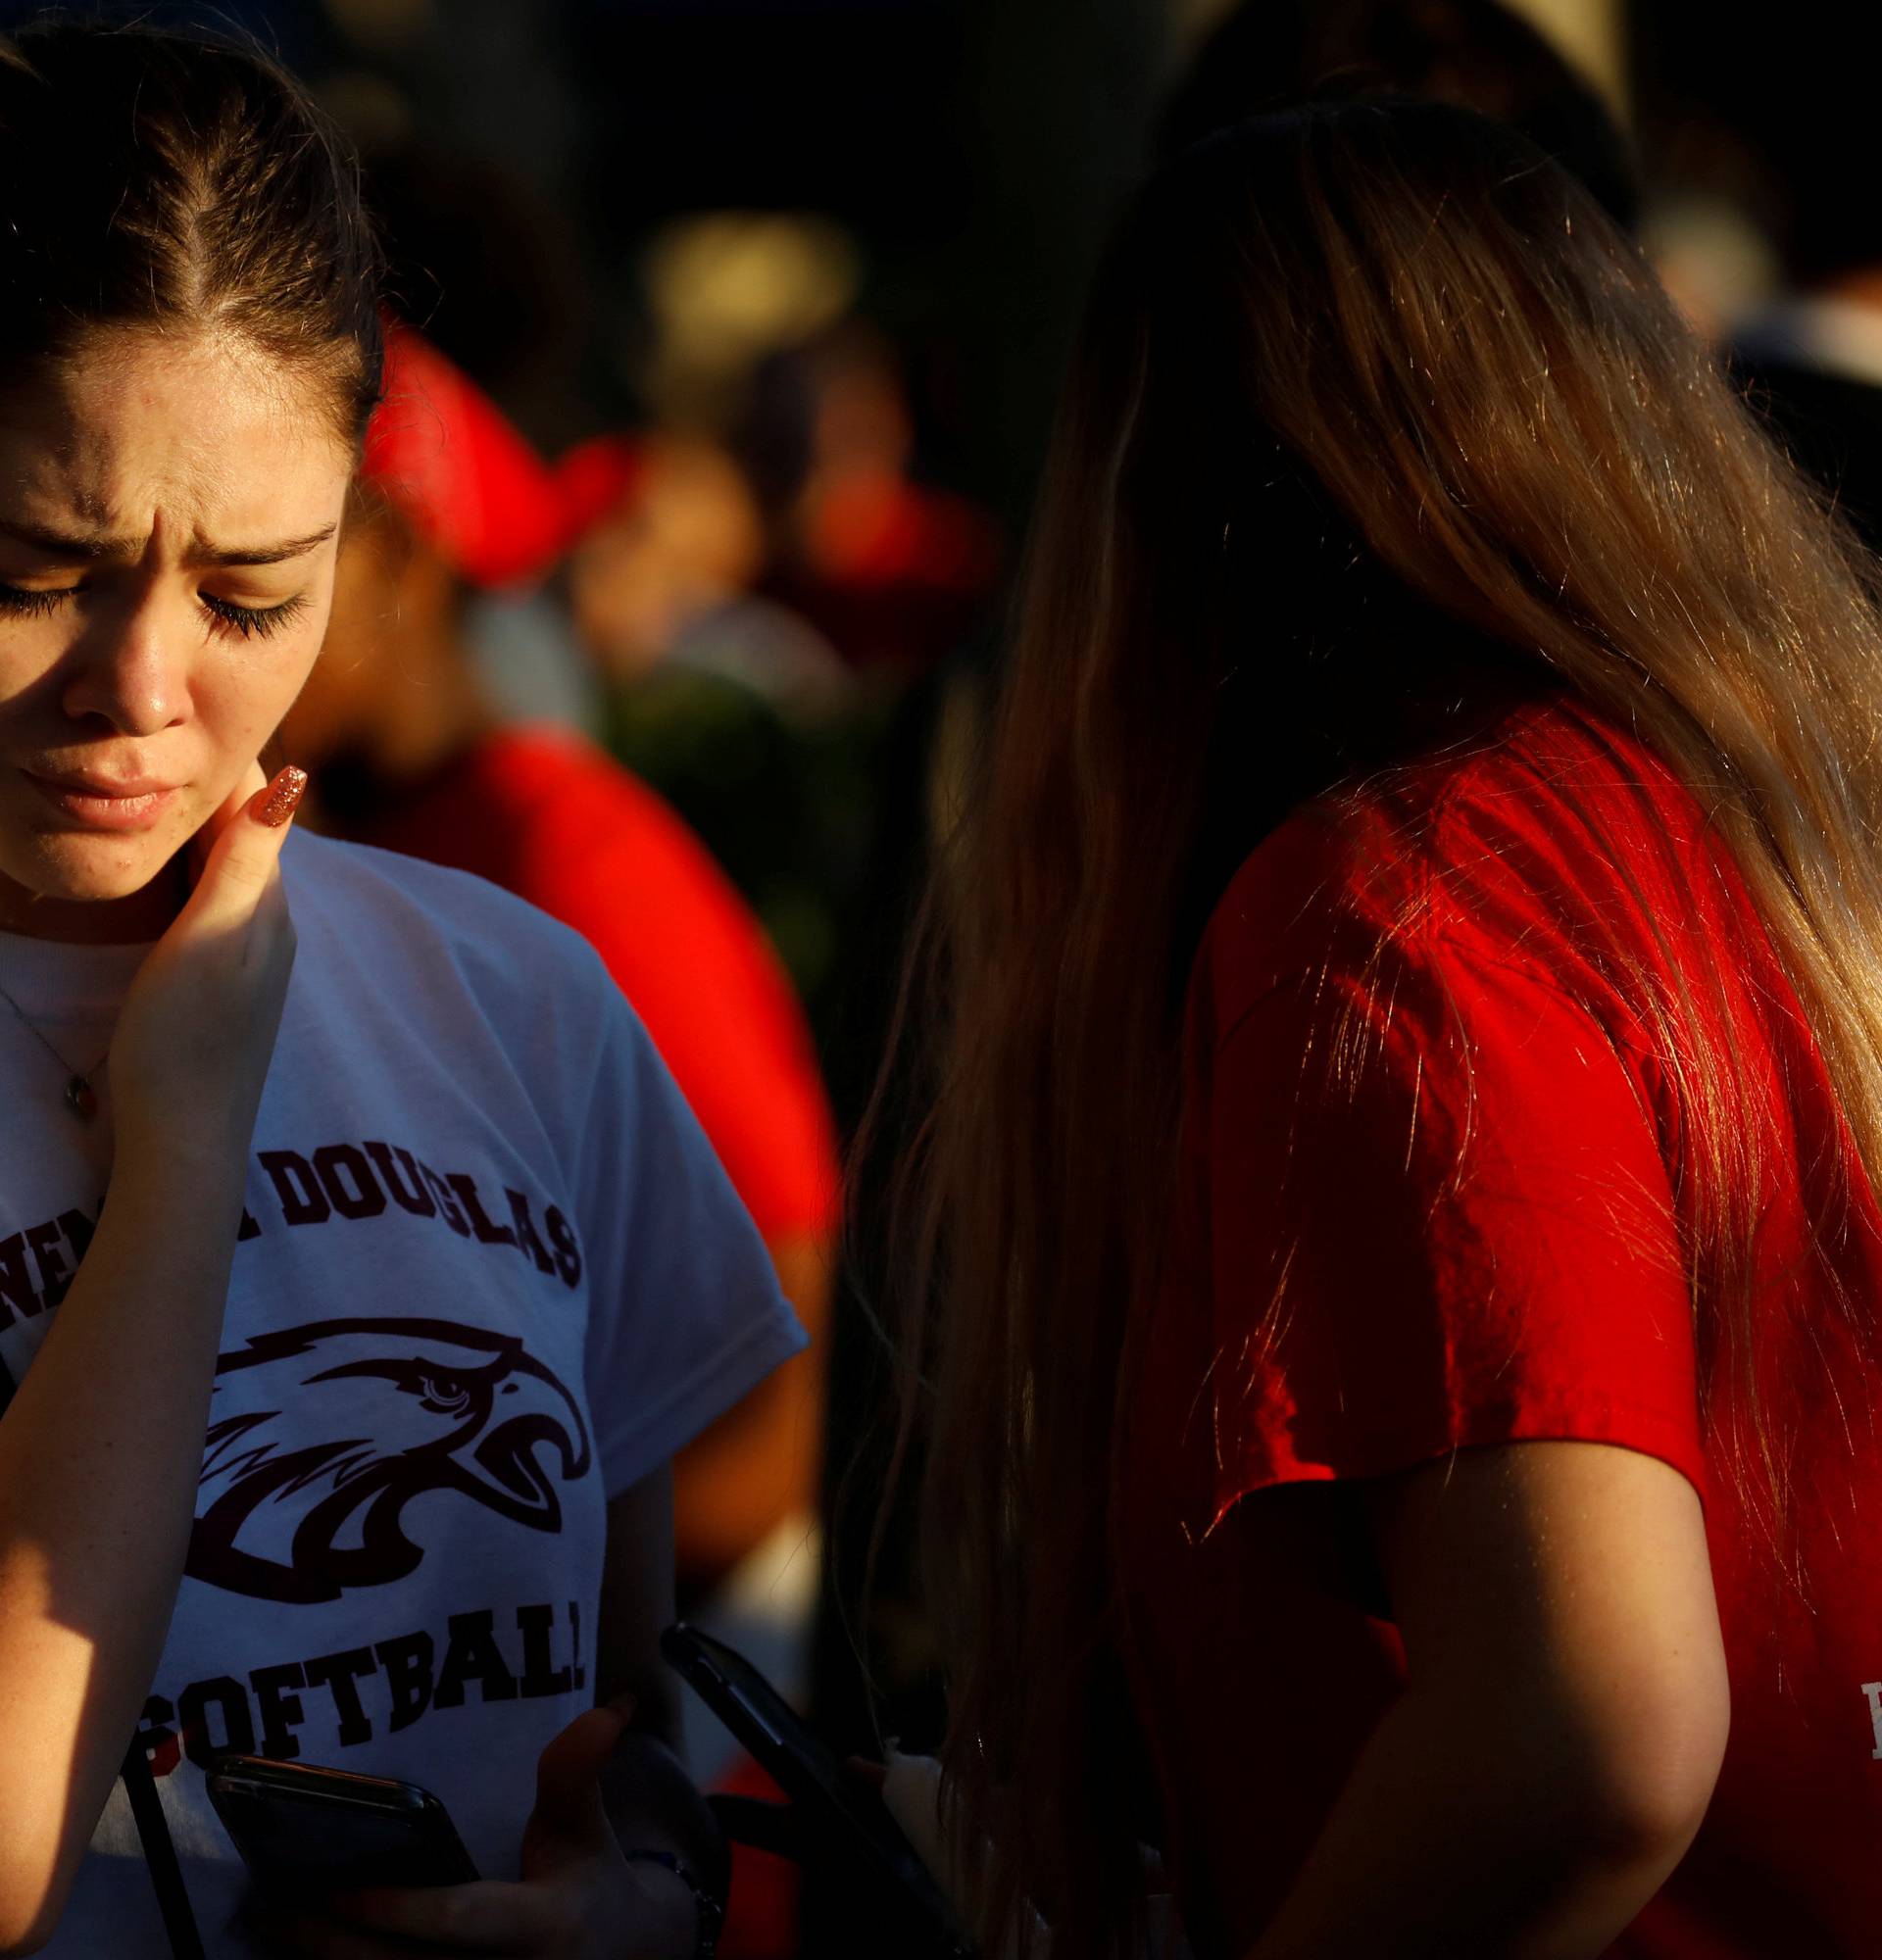 Student mourns during a candlelight vigil for victims of yesterday's shooting at nearby Marjory Stoneman Douglas High School, in Parkland